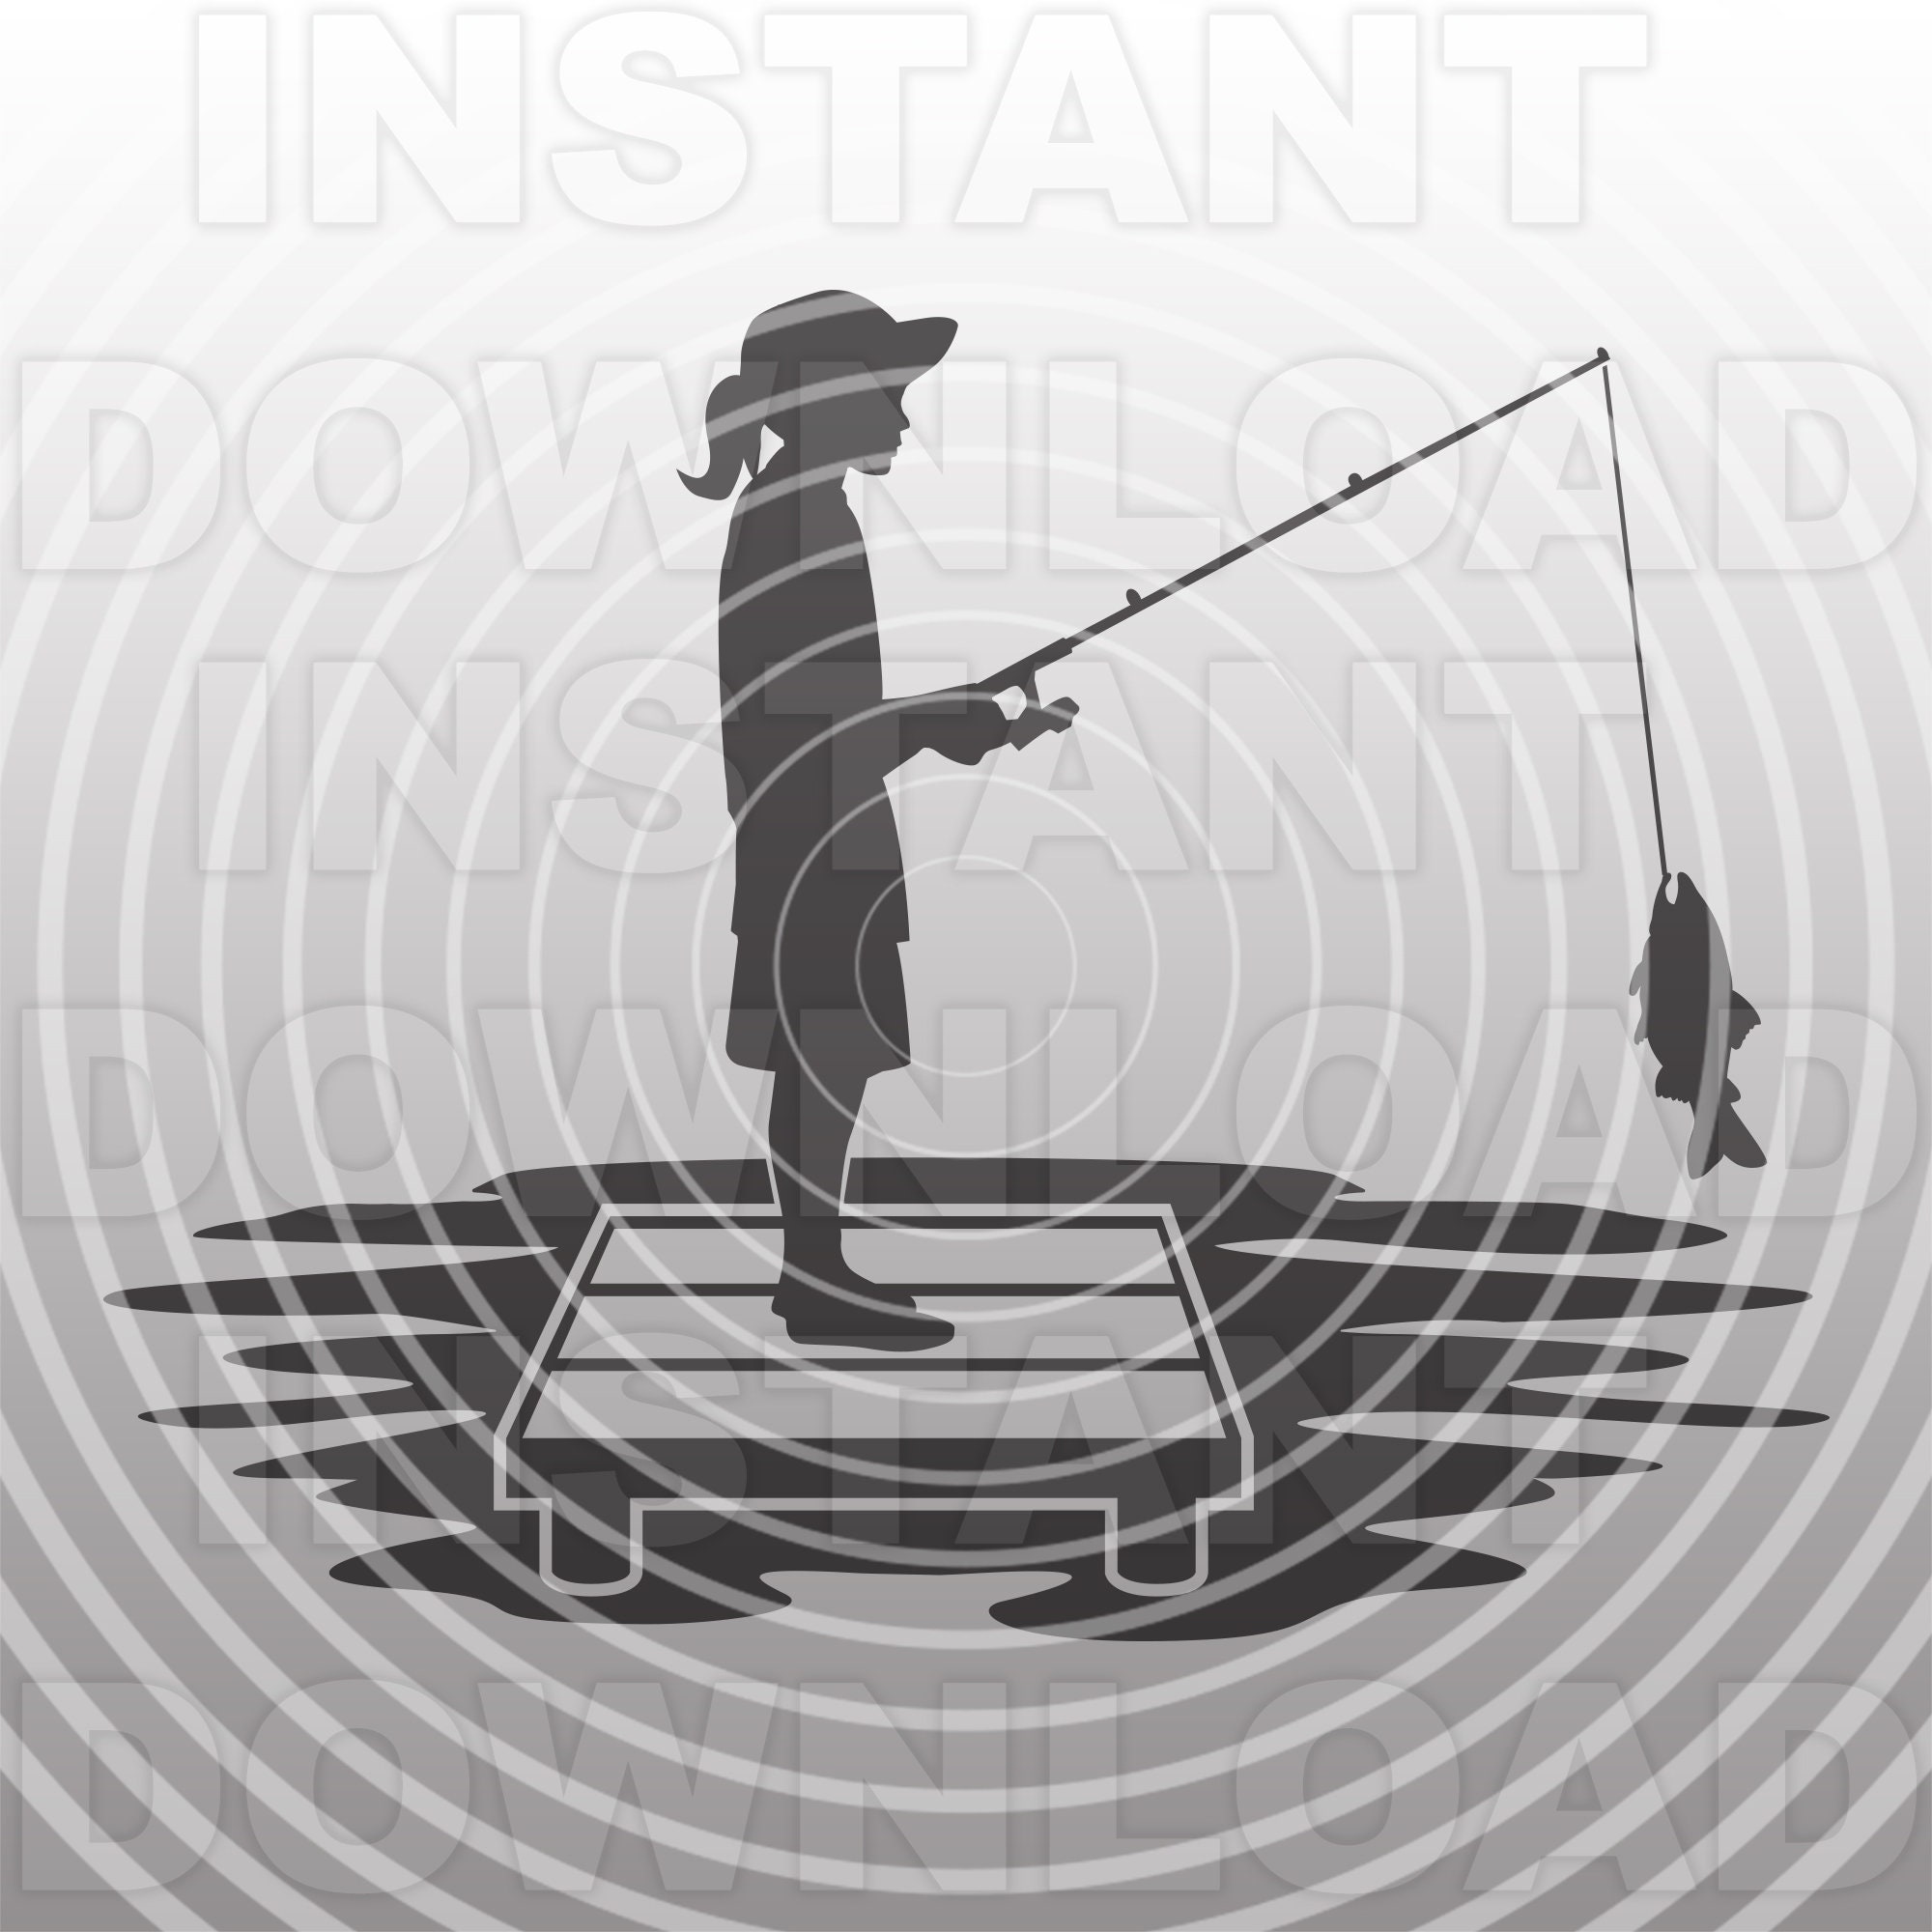 Young Girl With Fishing Rod Fishing on Lake Dock SVG File,girl Catching  Fish Svg commercial & Personal Use Cricut,silhouette Cameo,vinyl 